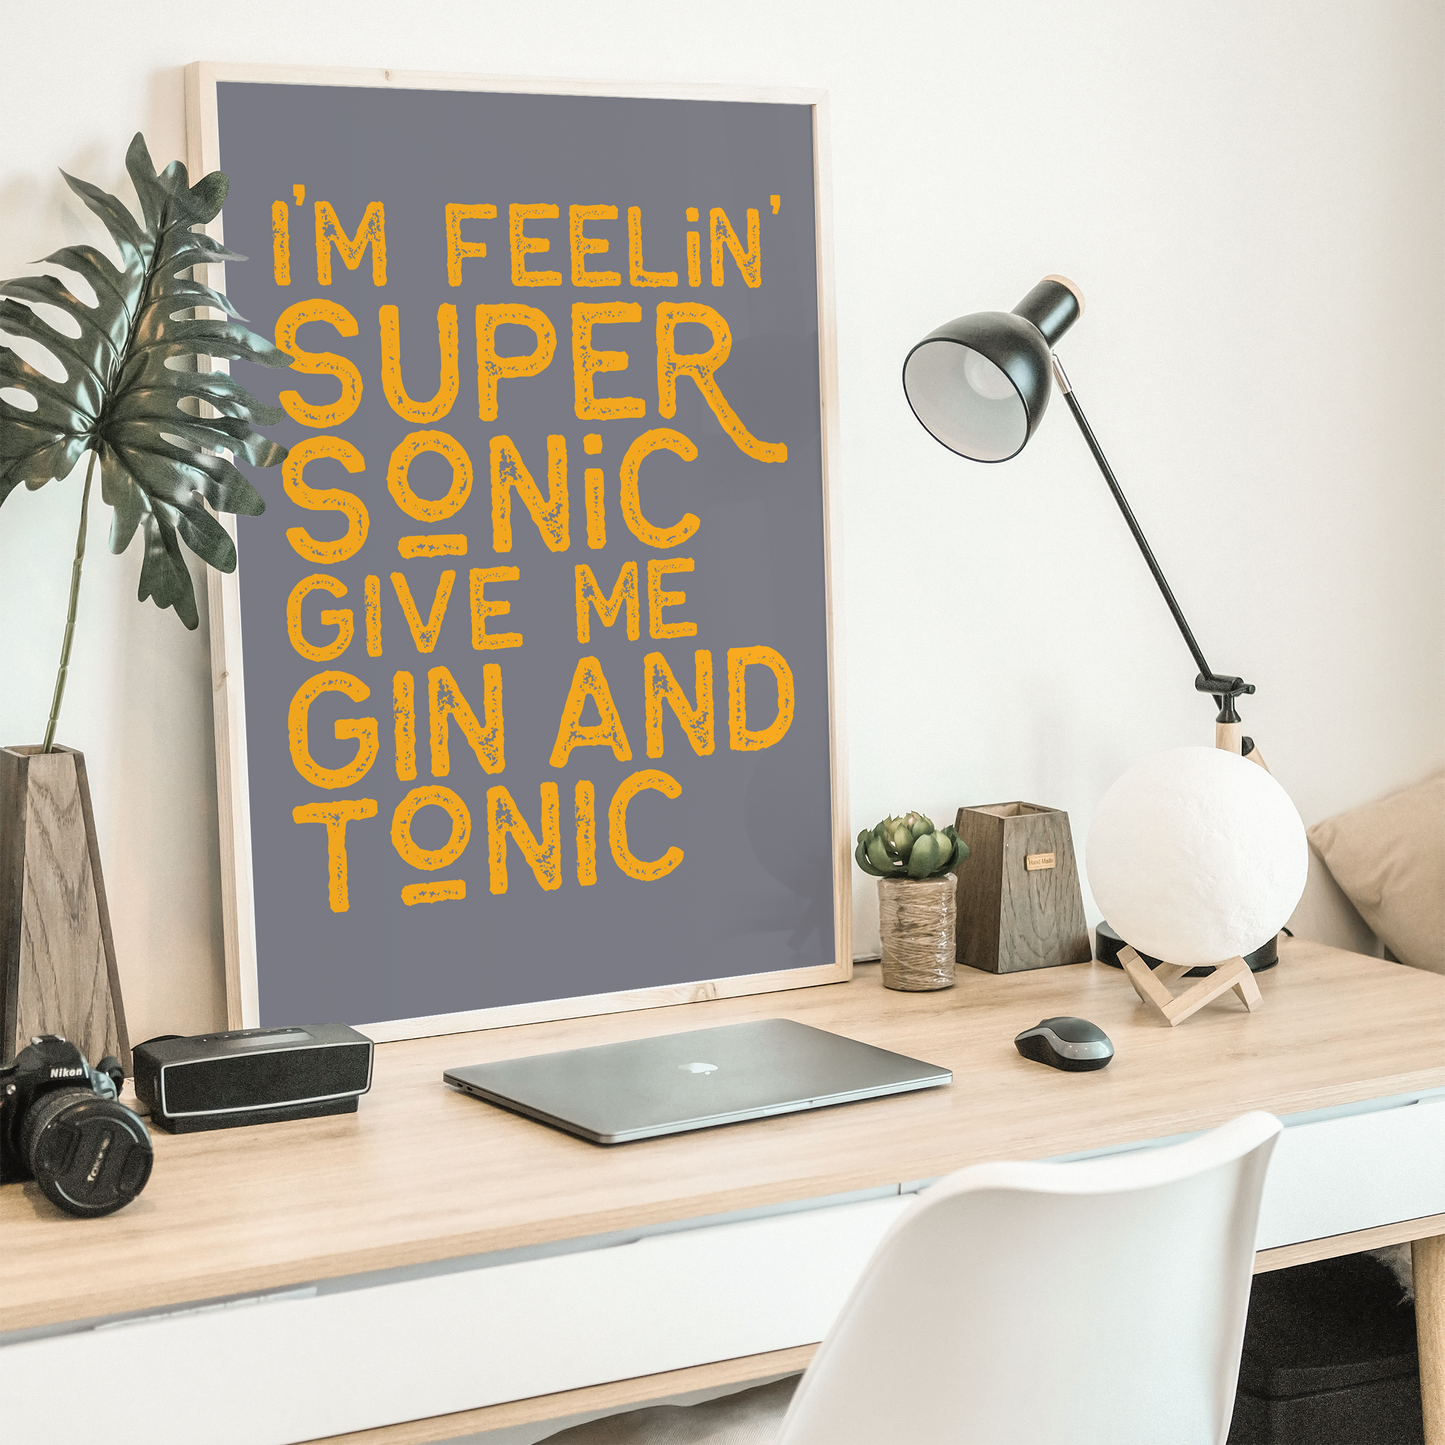 Supersonic Gin and Tonic Art Print Bold